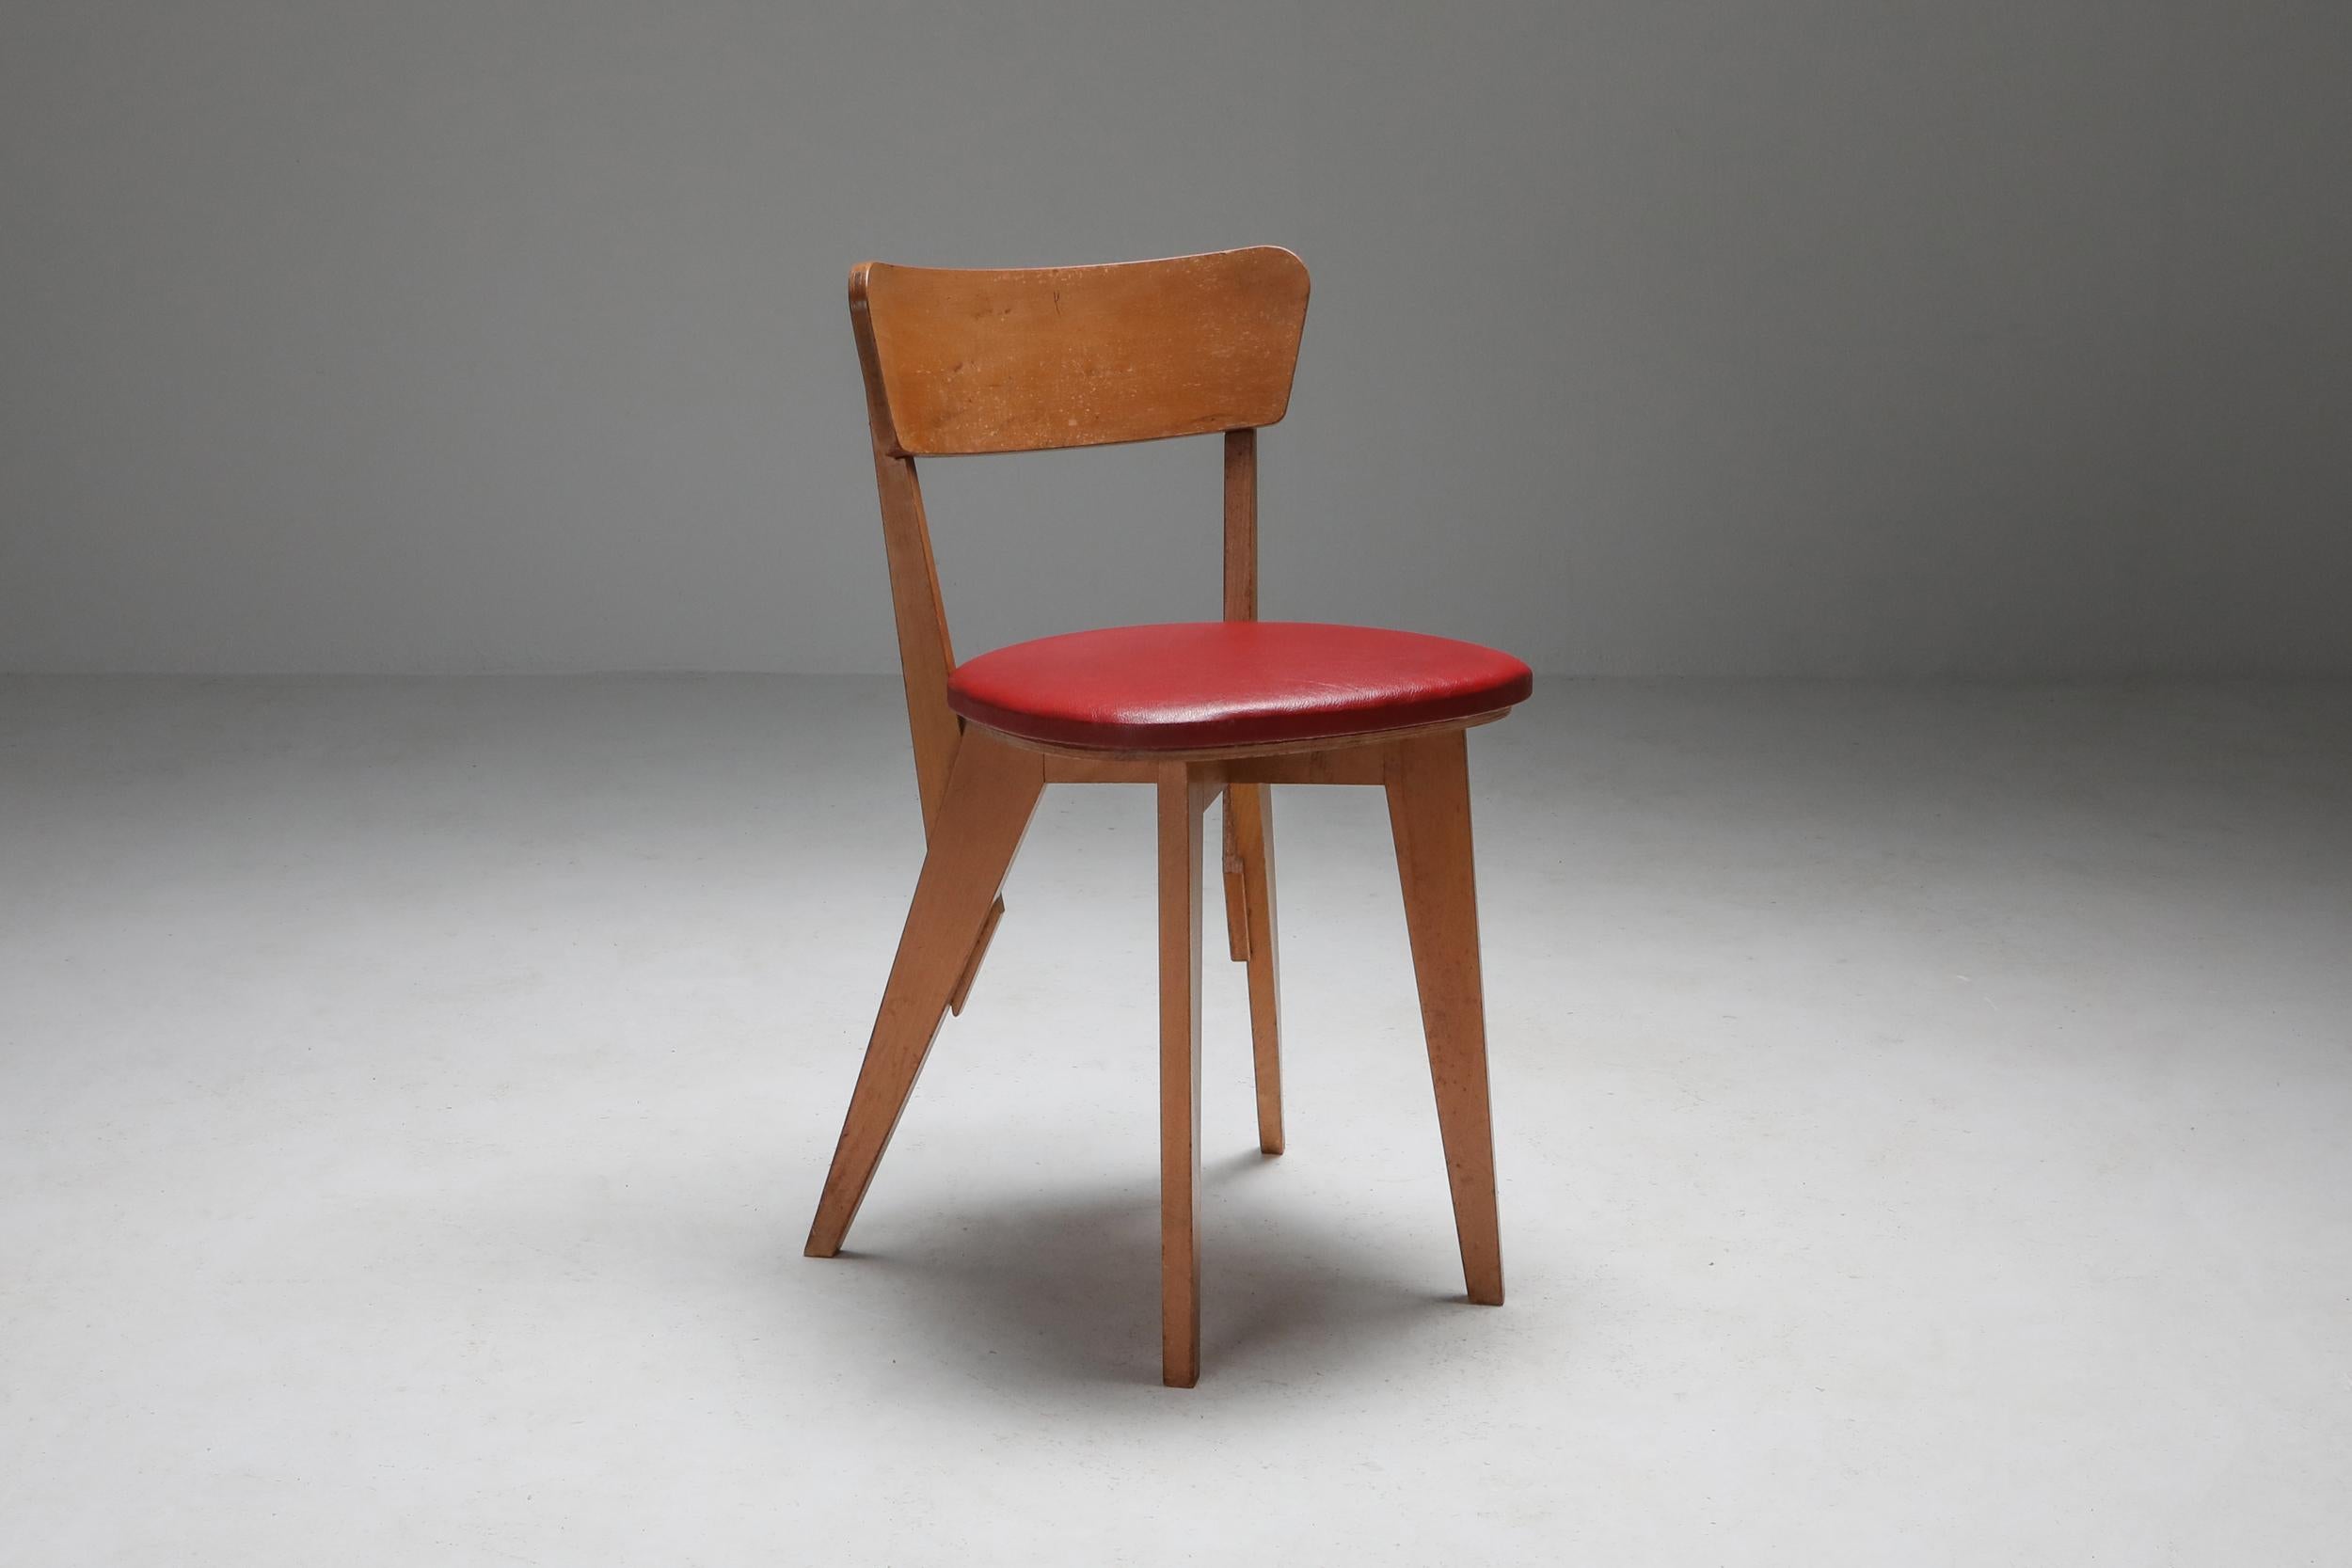 Dutch Modernist Chair by Wim Den Boon, 1947 In Good Condition For Sale In Antwerp, BE